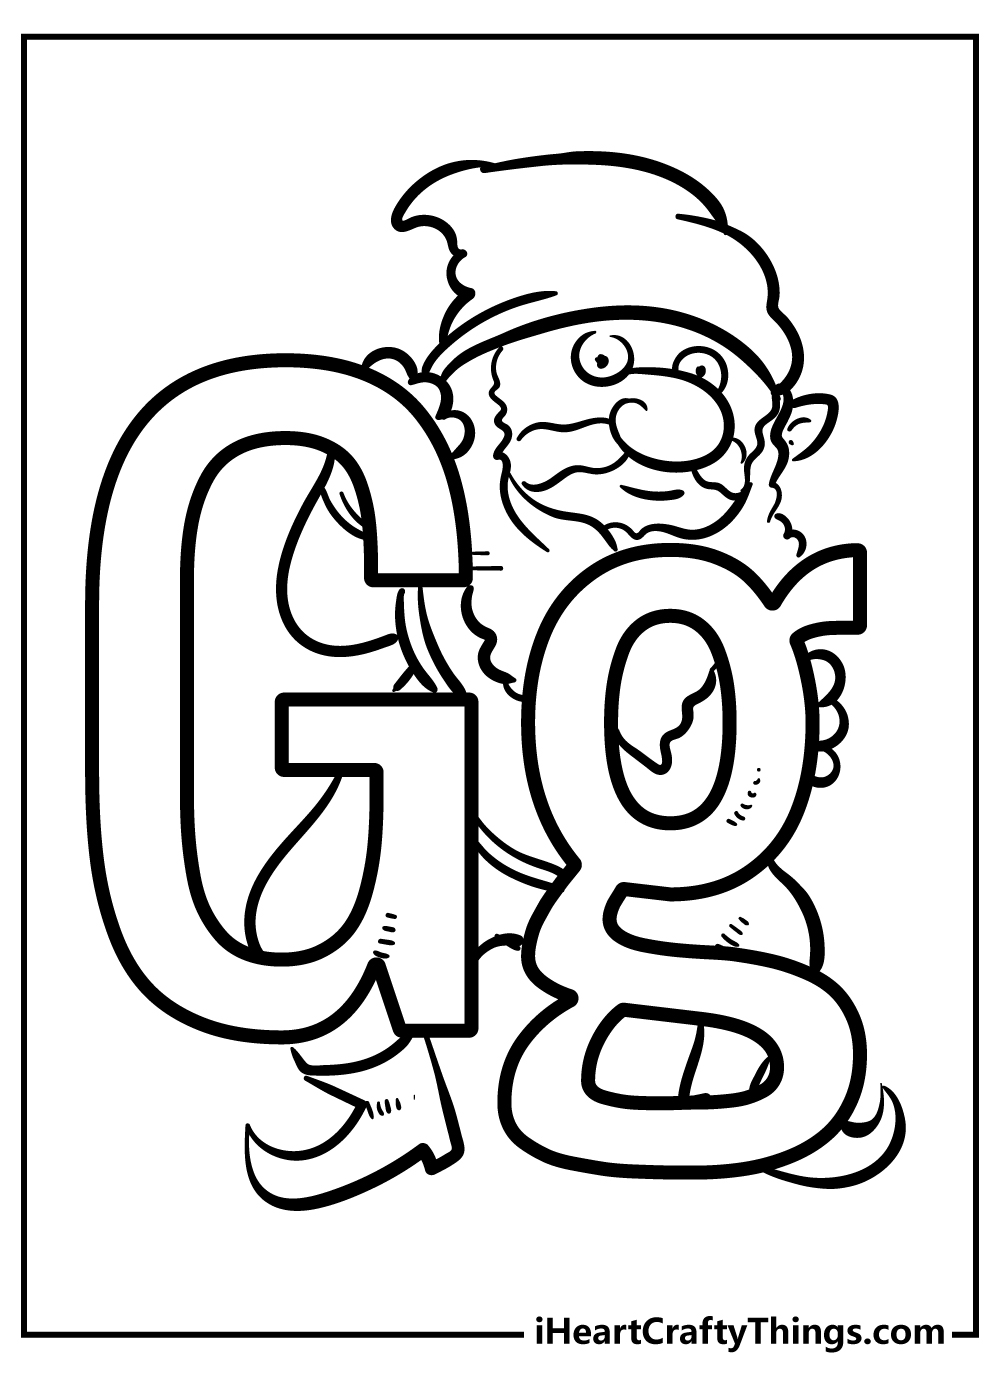 Letter G Coloring Pages free pdf download